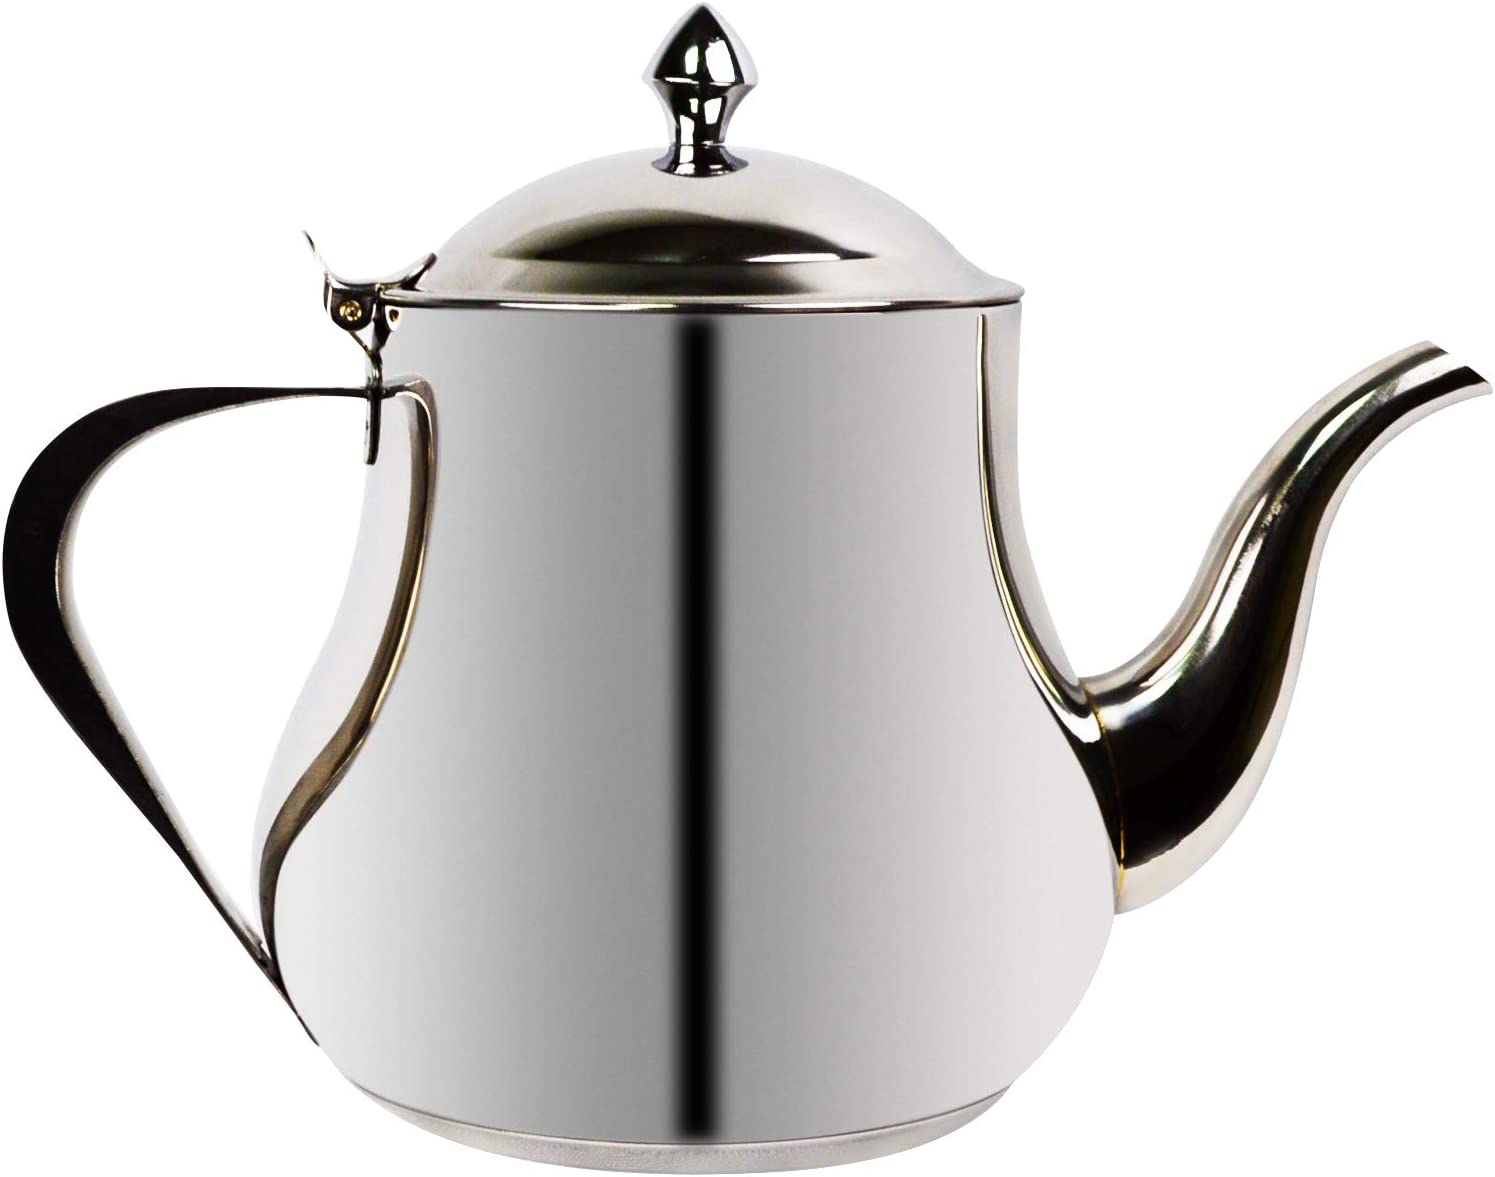 Ramadan24 Stainless Steel Teapot with Induction | Moroccan Arabic Design | with Lid Tea Filter Spout & Handles | 3-in-1 Also as Coffee Pot, Kettle (1.3 Litres)